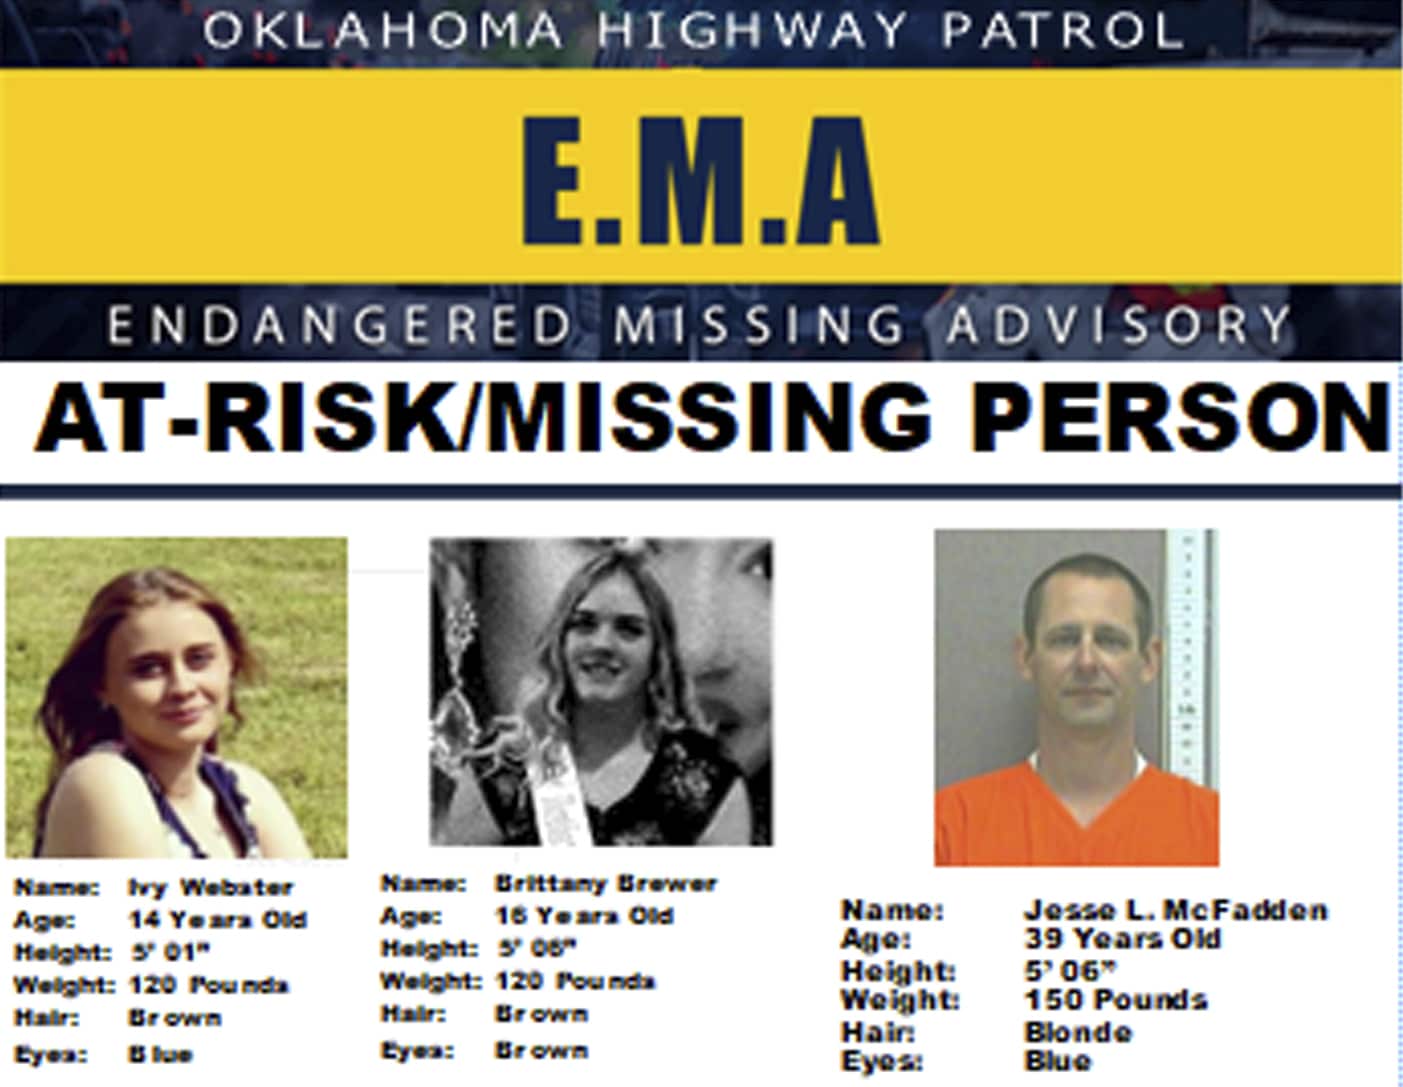 7 bodies found during search for missing Oklahoma teens | Courthouse ...